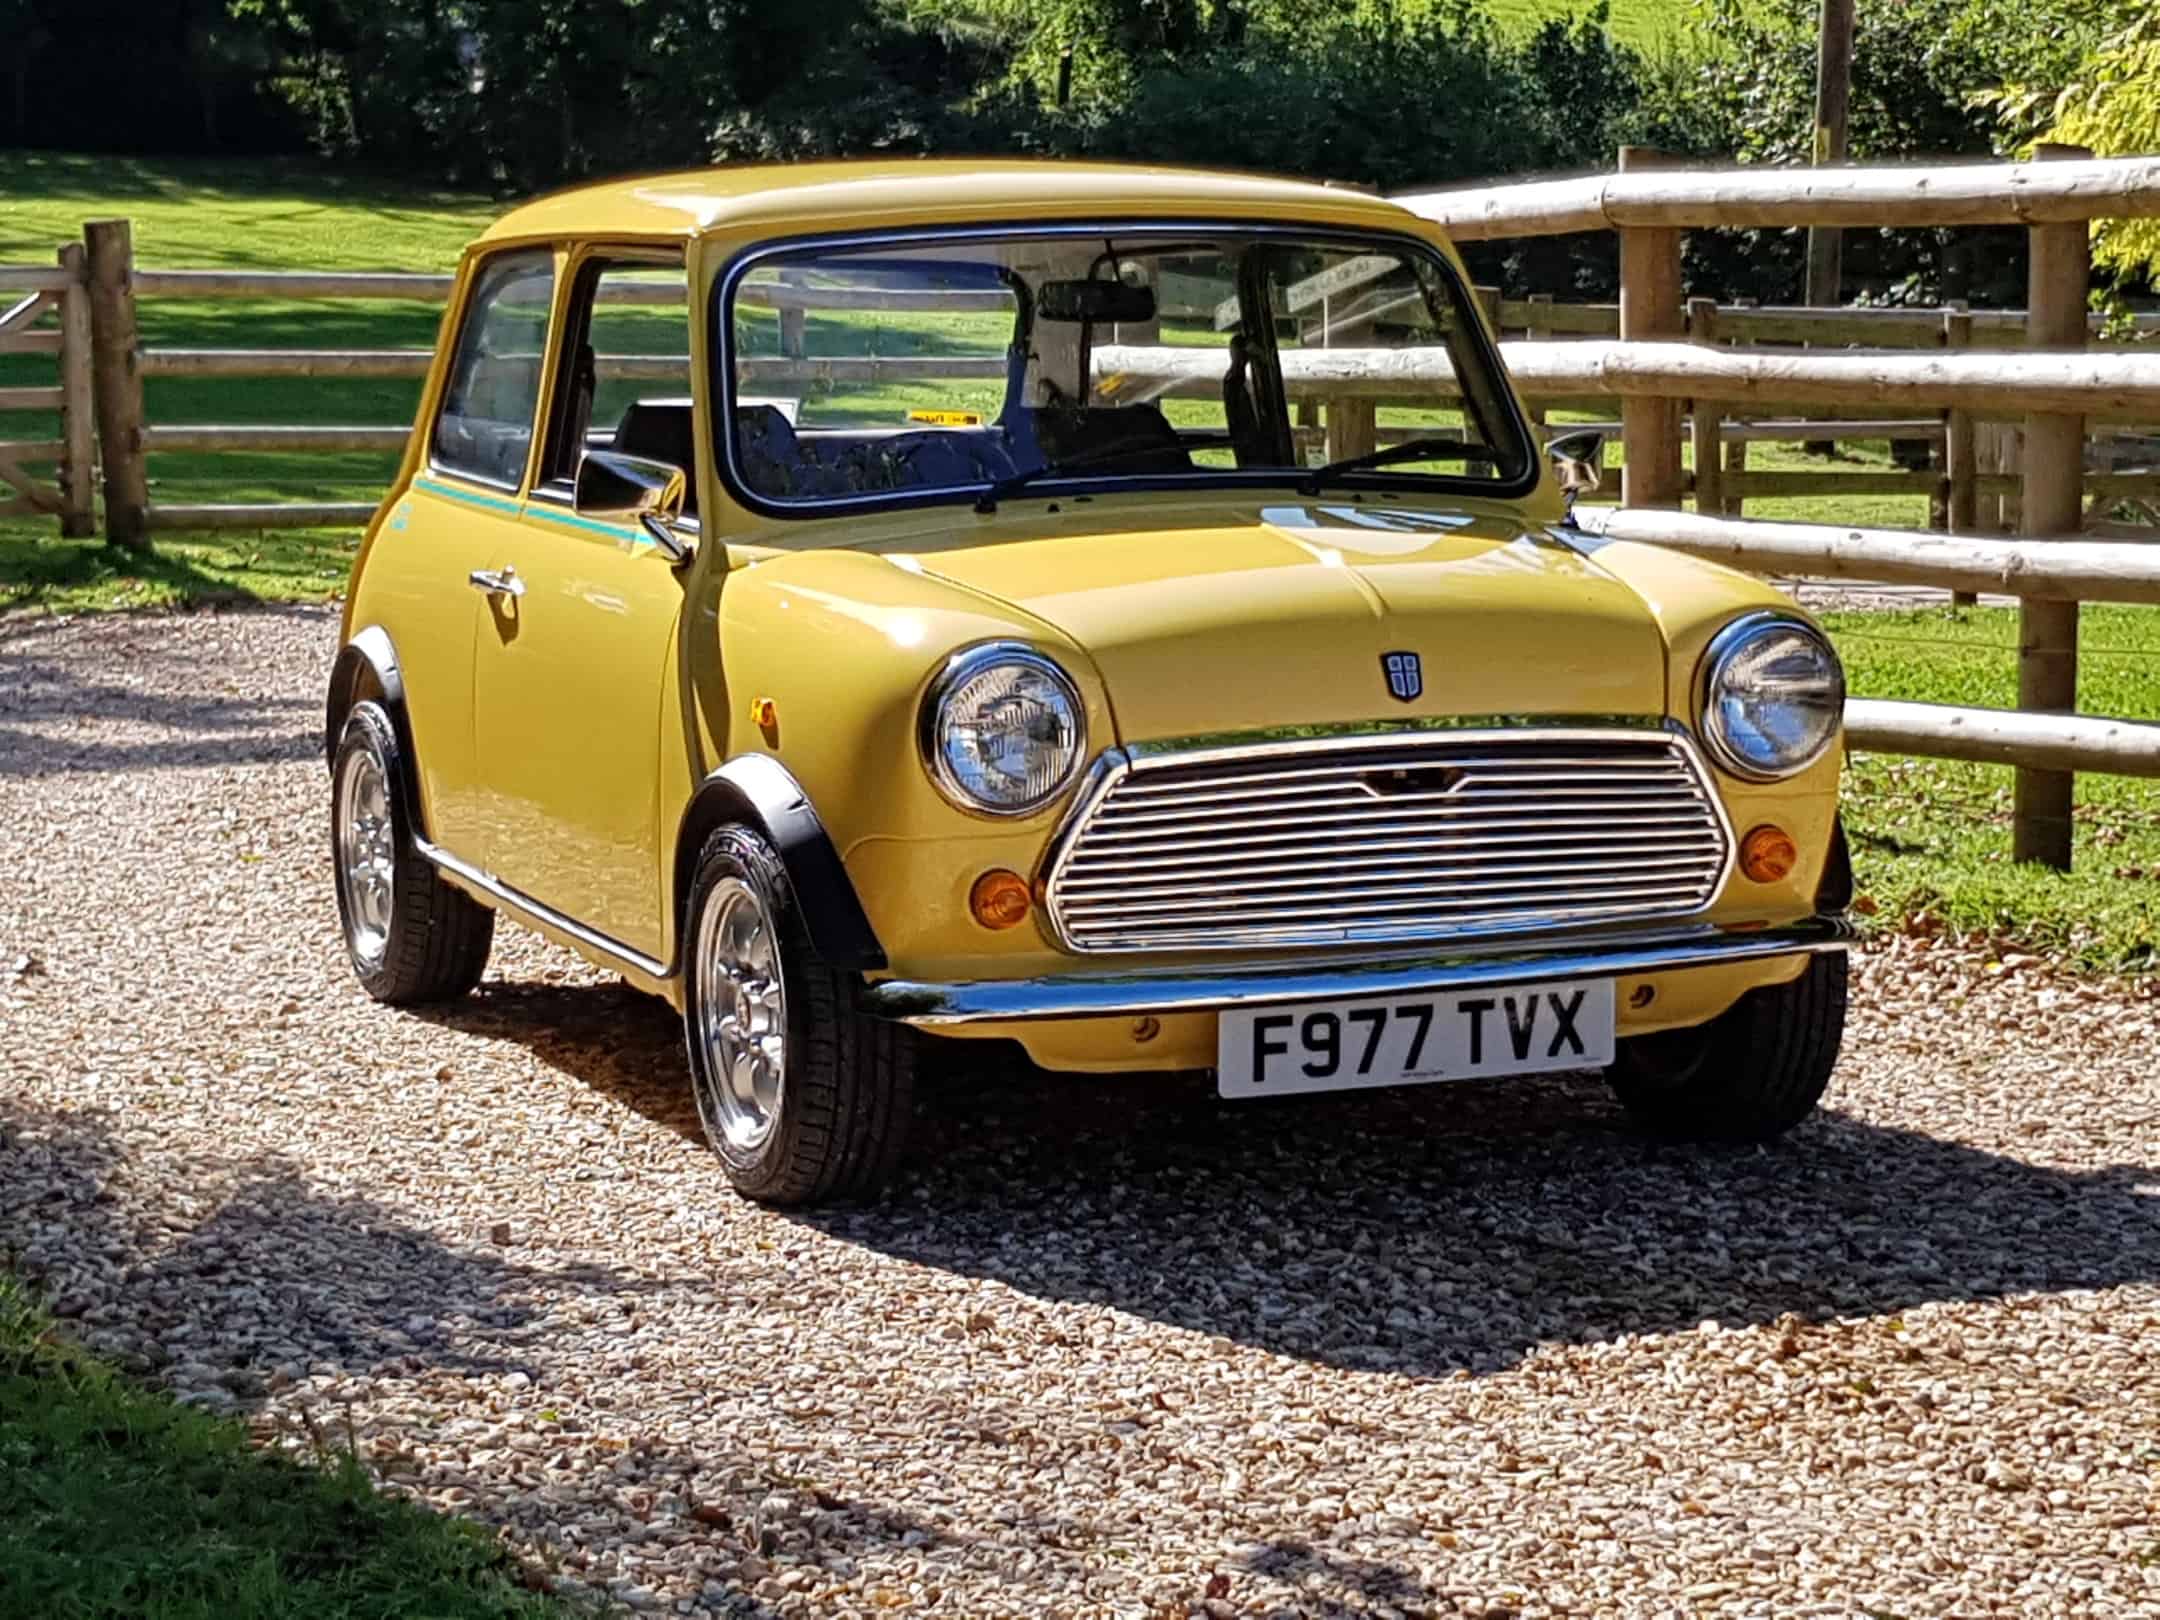 ** NOW SOLD ** Amazing Austin Mini City On Just 14900 Miles From New!!